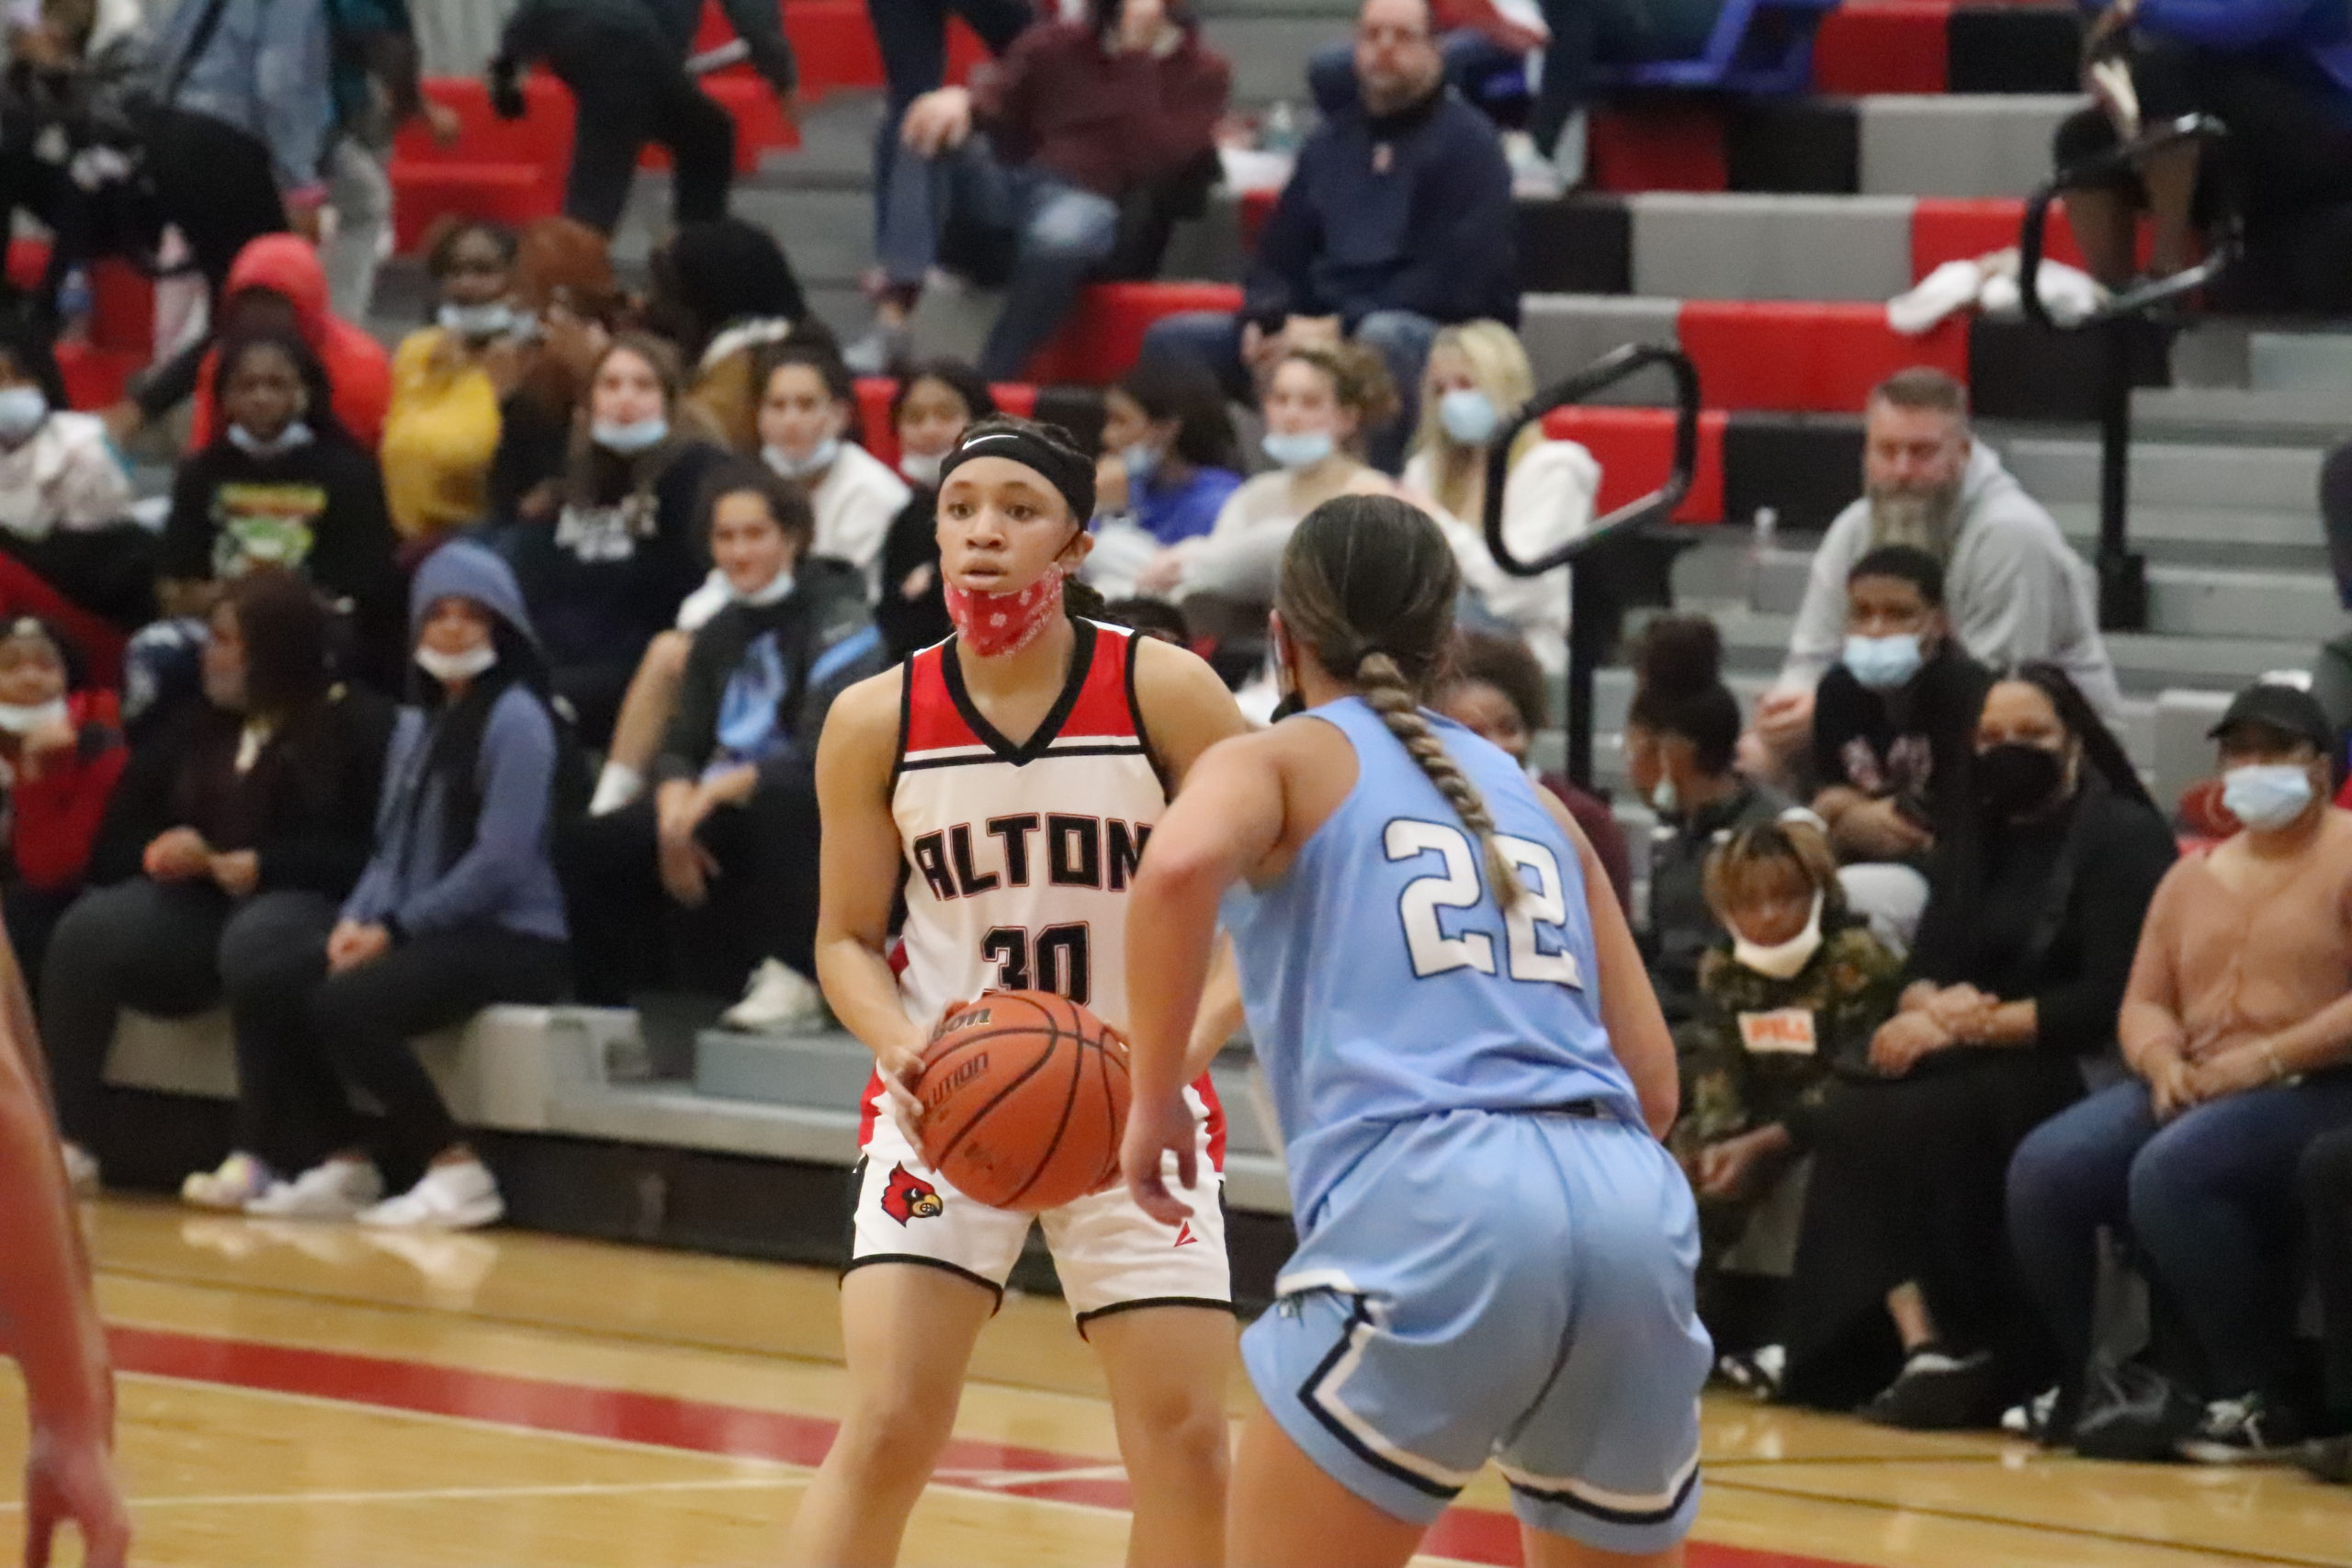 Alton Girls Basketball Team Jumps To A 7742 Win Over Jersey In The